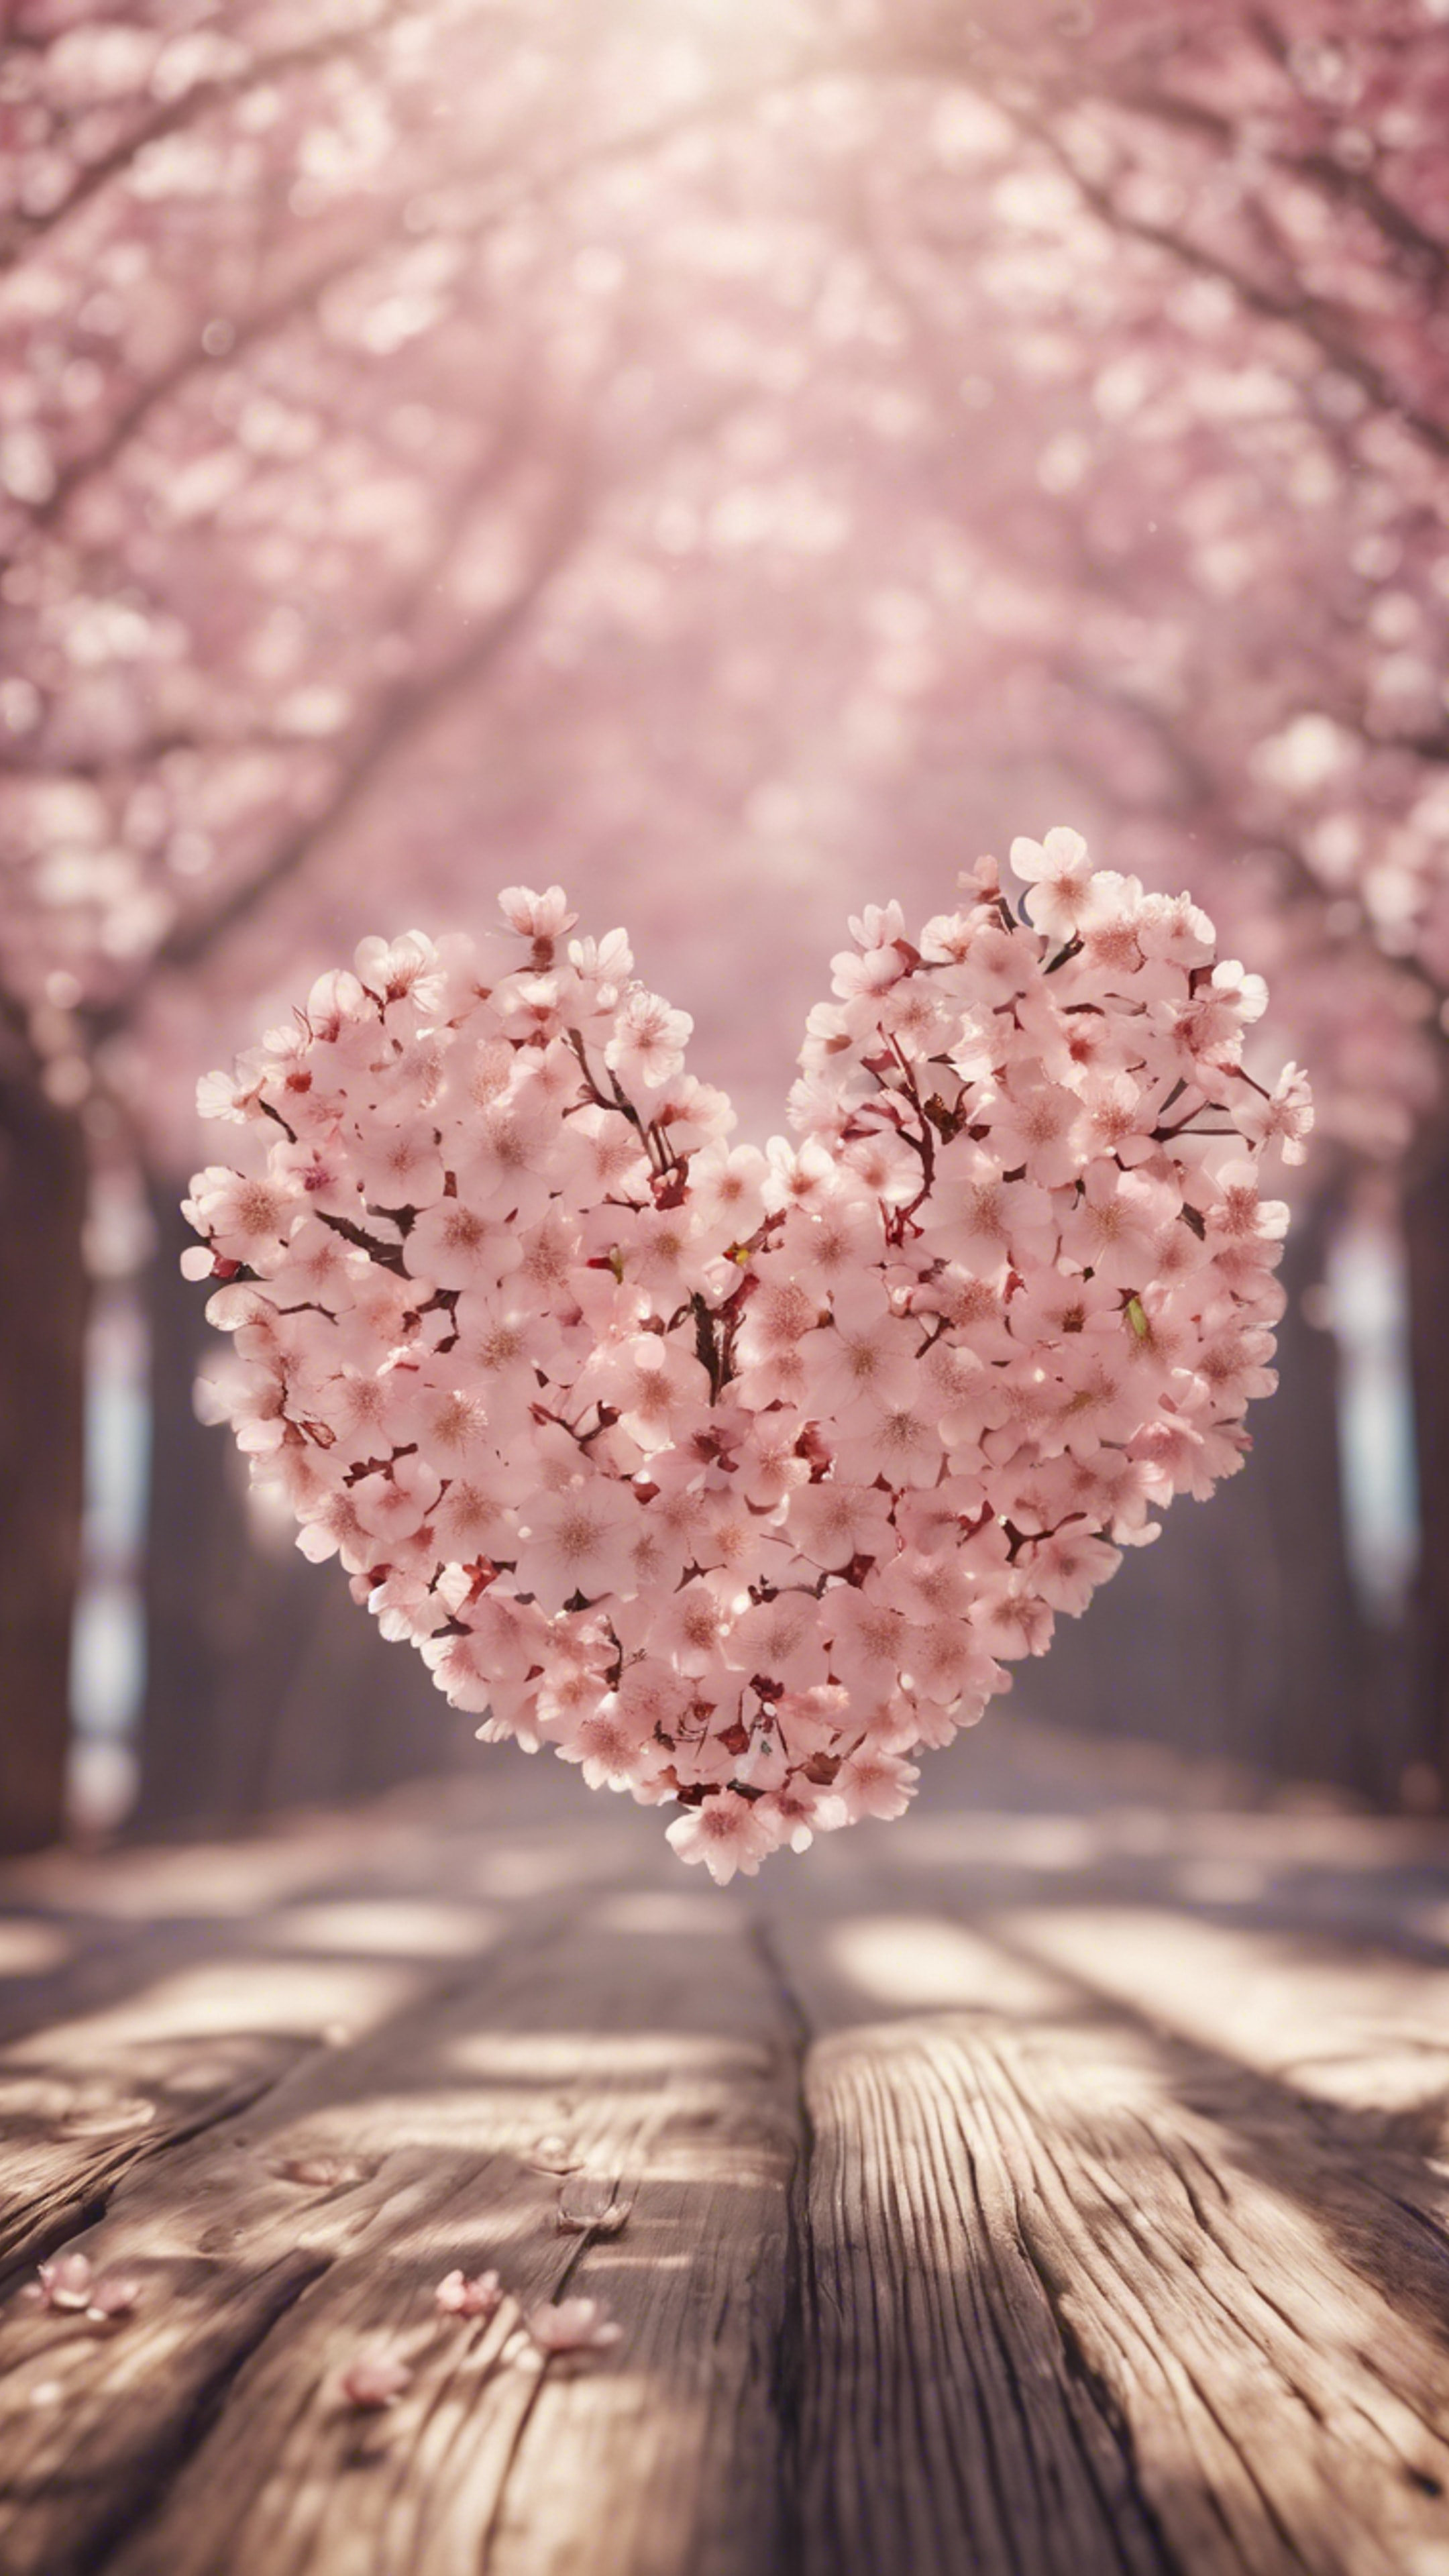 A heart made of cherry blossoms on a wooden surface.壁紙[bbe7434265eb45889c8a]